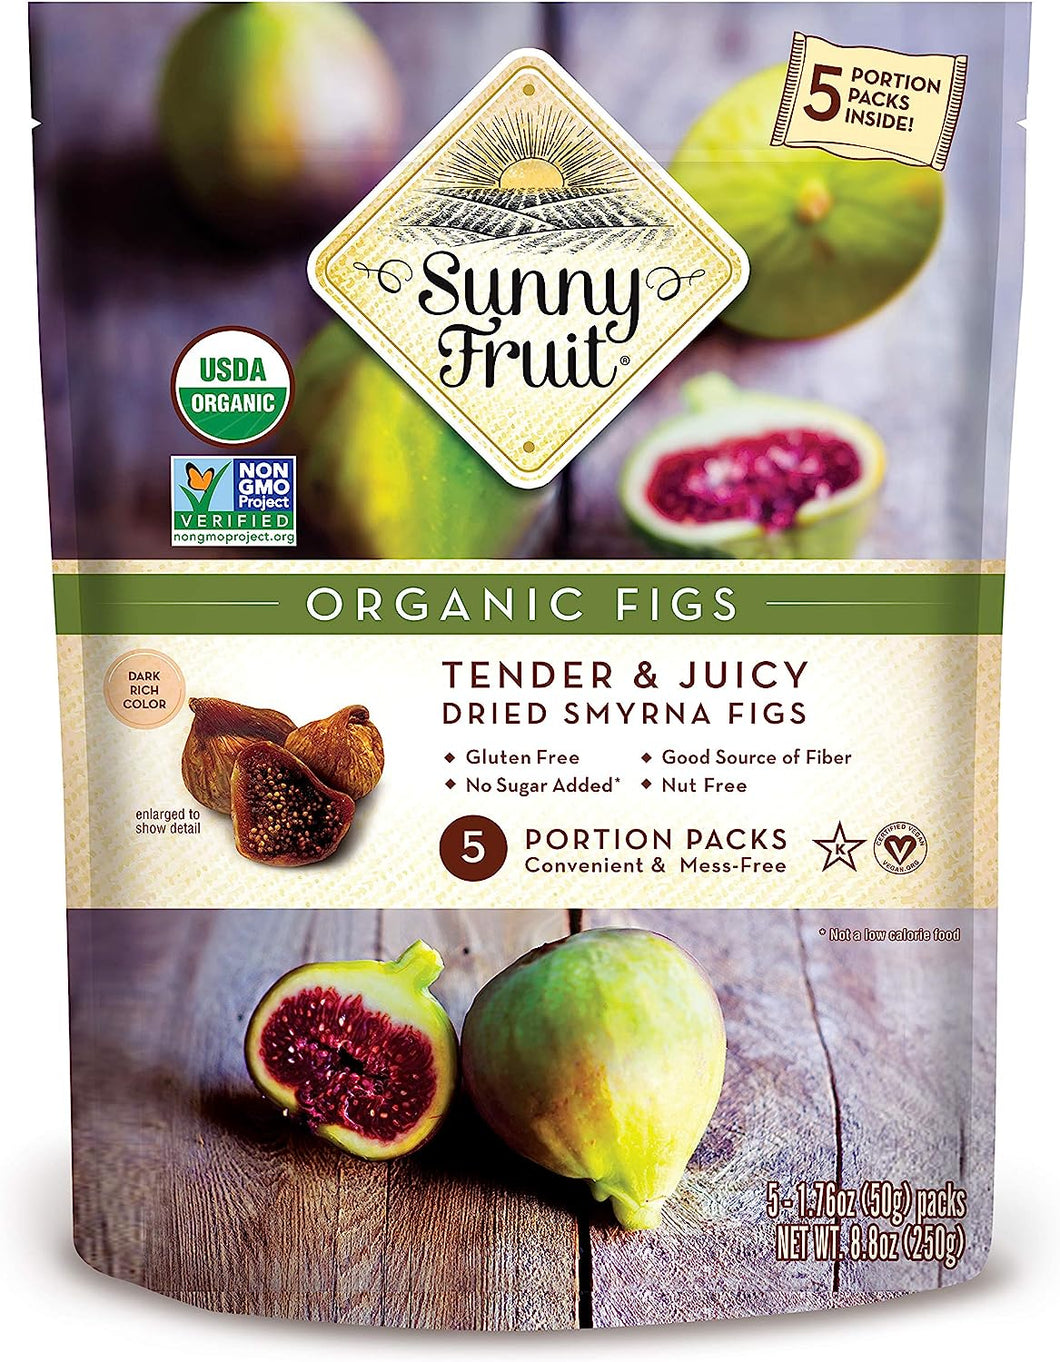 Sunny Fruits - Organic Figs, 5 portion packs